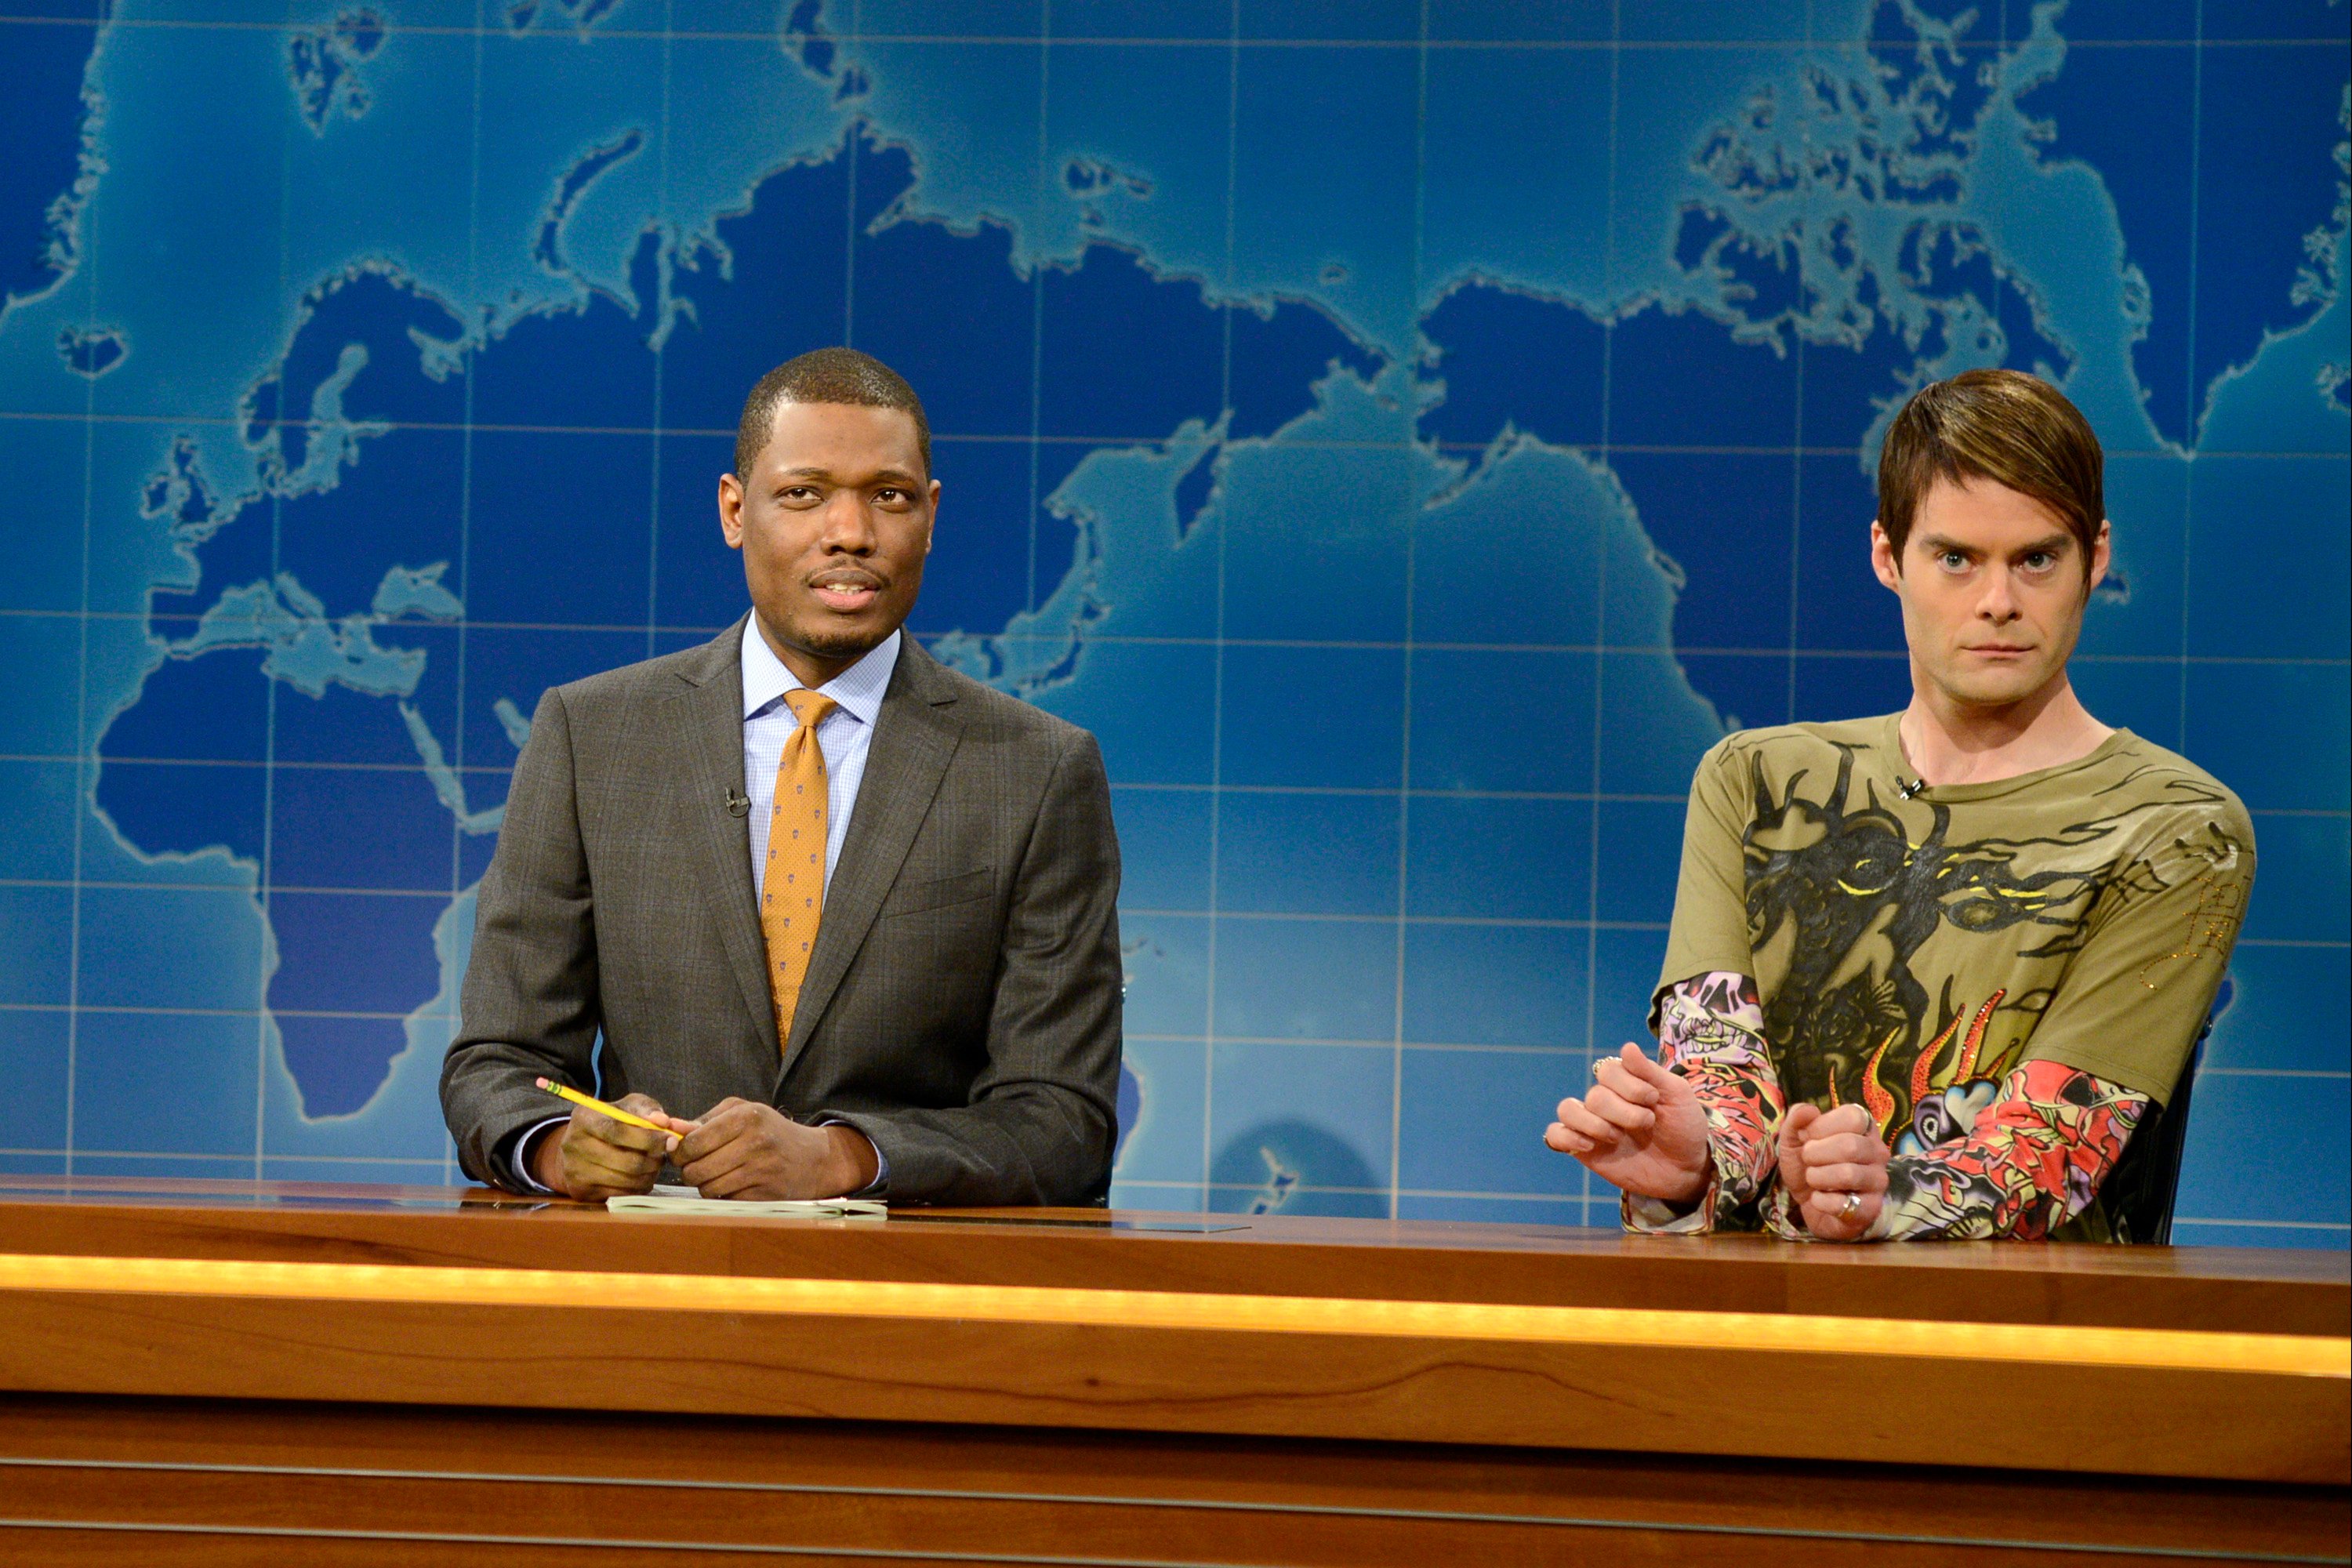 Bill Hader appears as Stefon with Michael Che on Weekend Update on Saturday Night Live (SNL)